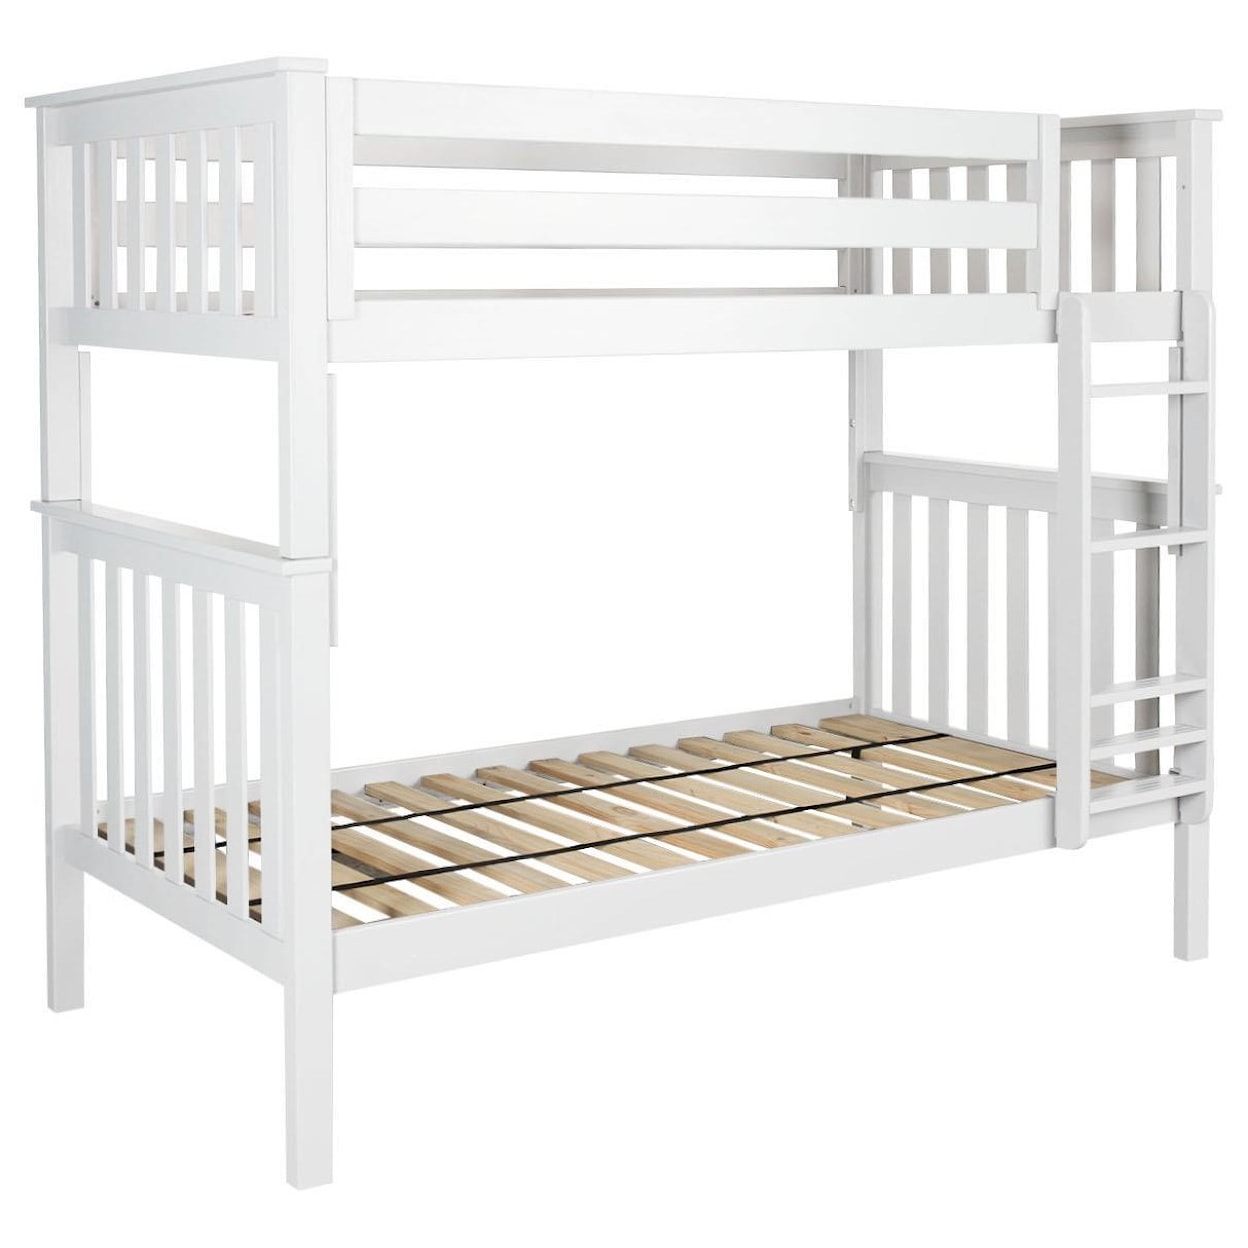 Jackpot Kids Bunk Beds Bristol Twin/Twin Bunk Bed in White